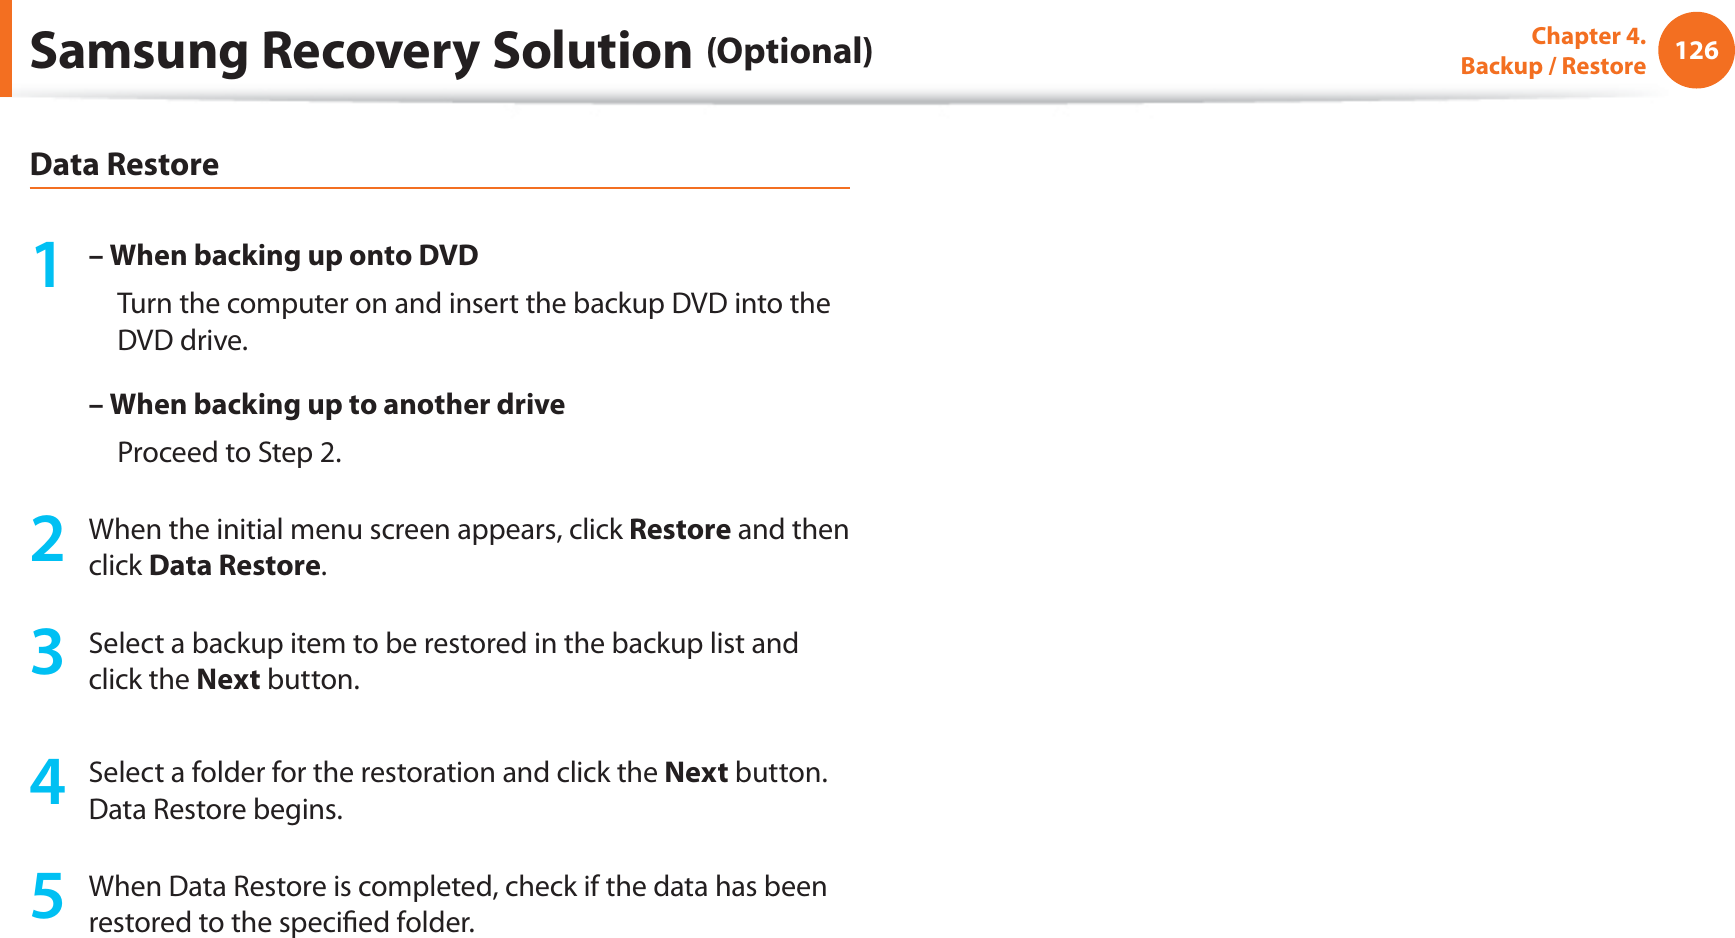 126Chapter 4.   Backup / RestoreData Restore1 – When backing up onto DVD     Turn the computer on and insert the backup DVD into the DVD drive.–  When backing up to another drive     Proceed to Step 2.2  When the initial menu screen appears, click Restore and then click Data Restore.3  Select a backup item to be restored in the backup list and click the Next button.4  Select a folder for the restoration and click the Next button. Data Restore begins.5  When Data Restore is completed, check if the data has been restored to the speciﬁed folder.Samsung Recovery Solution (Optional)